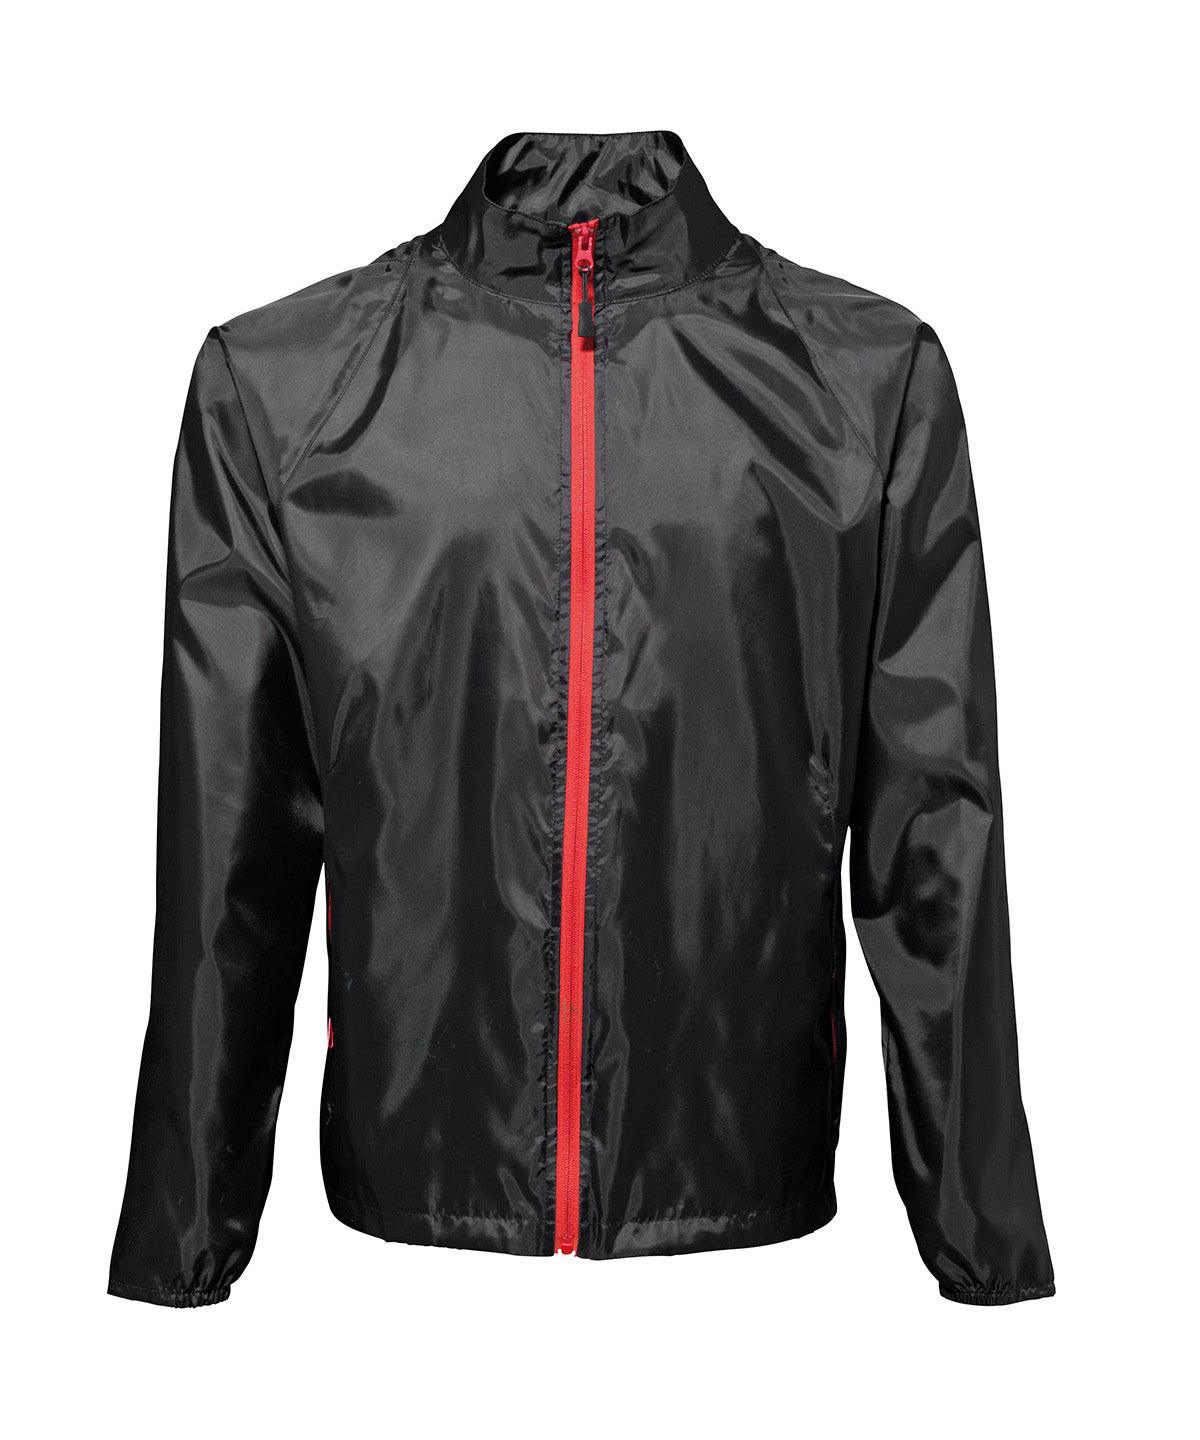 White/Red - Contrast lightweight jacket Jackets 2786 Alfresco Dining, Camo, Jackets & Coats, Lightweight layers, Rebrandable, S/S 19 Trend Colours Schoolwear Centres